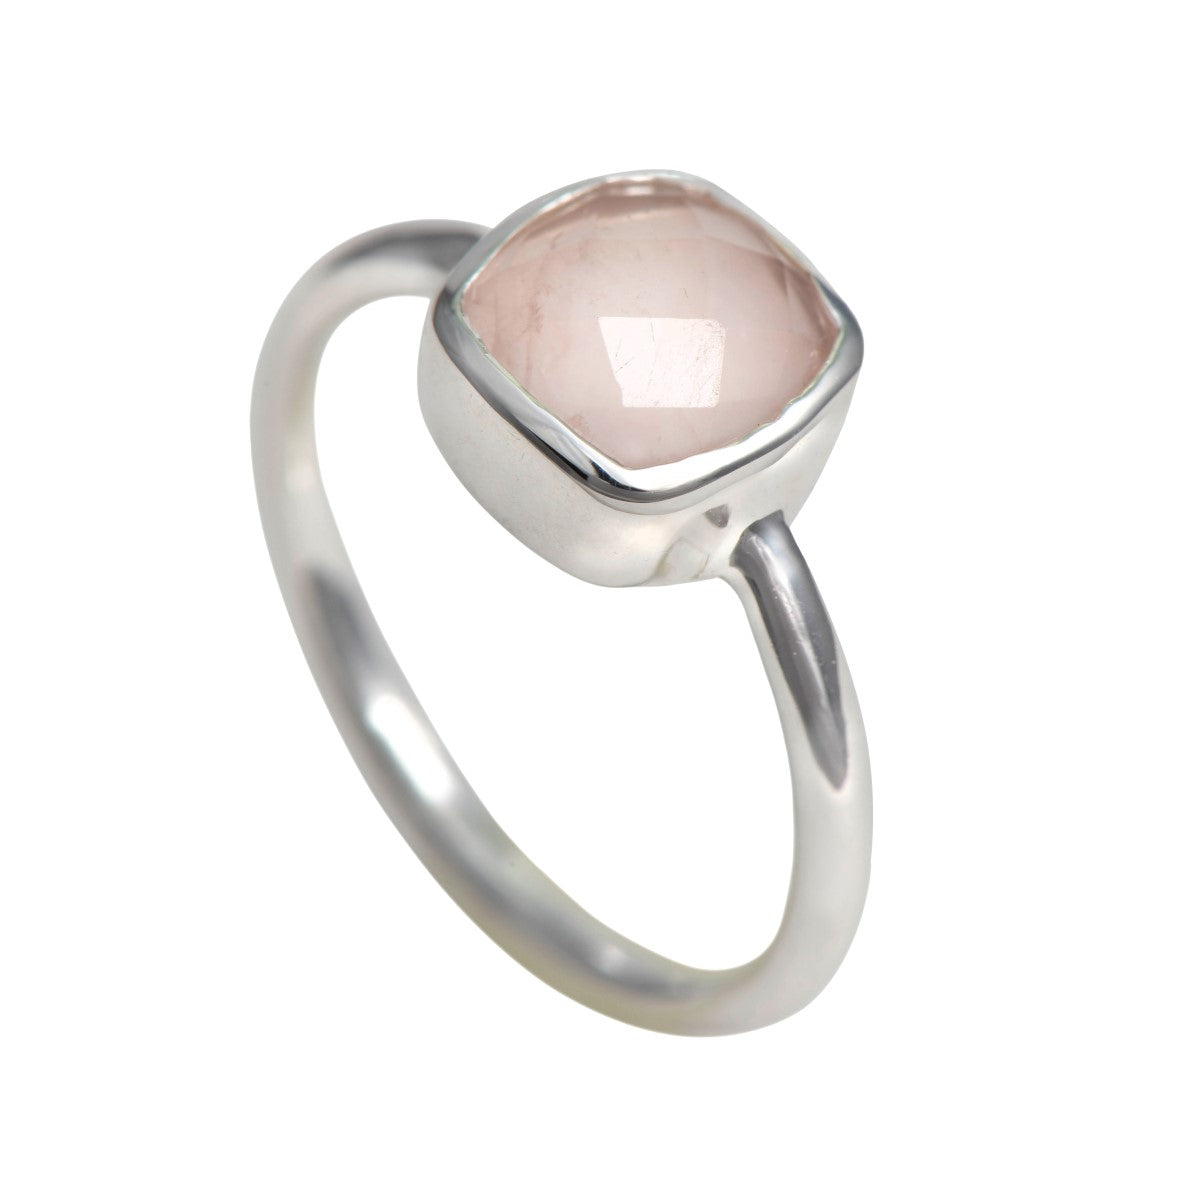 Faceted Square Cut Natural Gemstone Sterling Silver Solitaire Ring - Rose Quartz